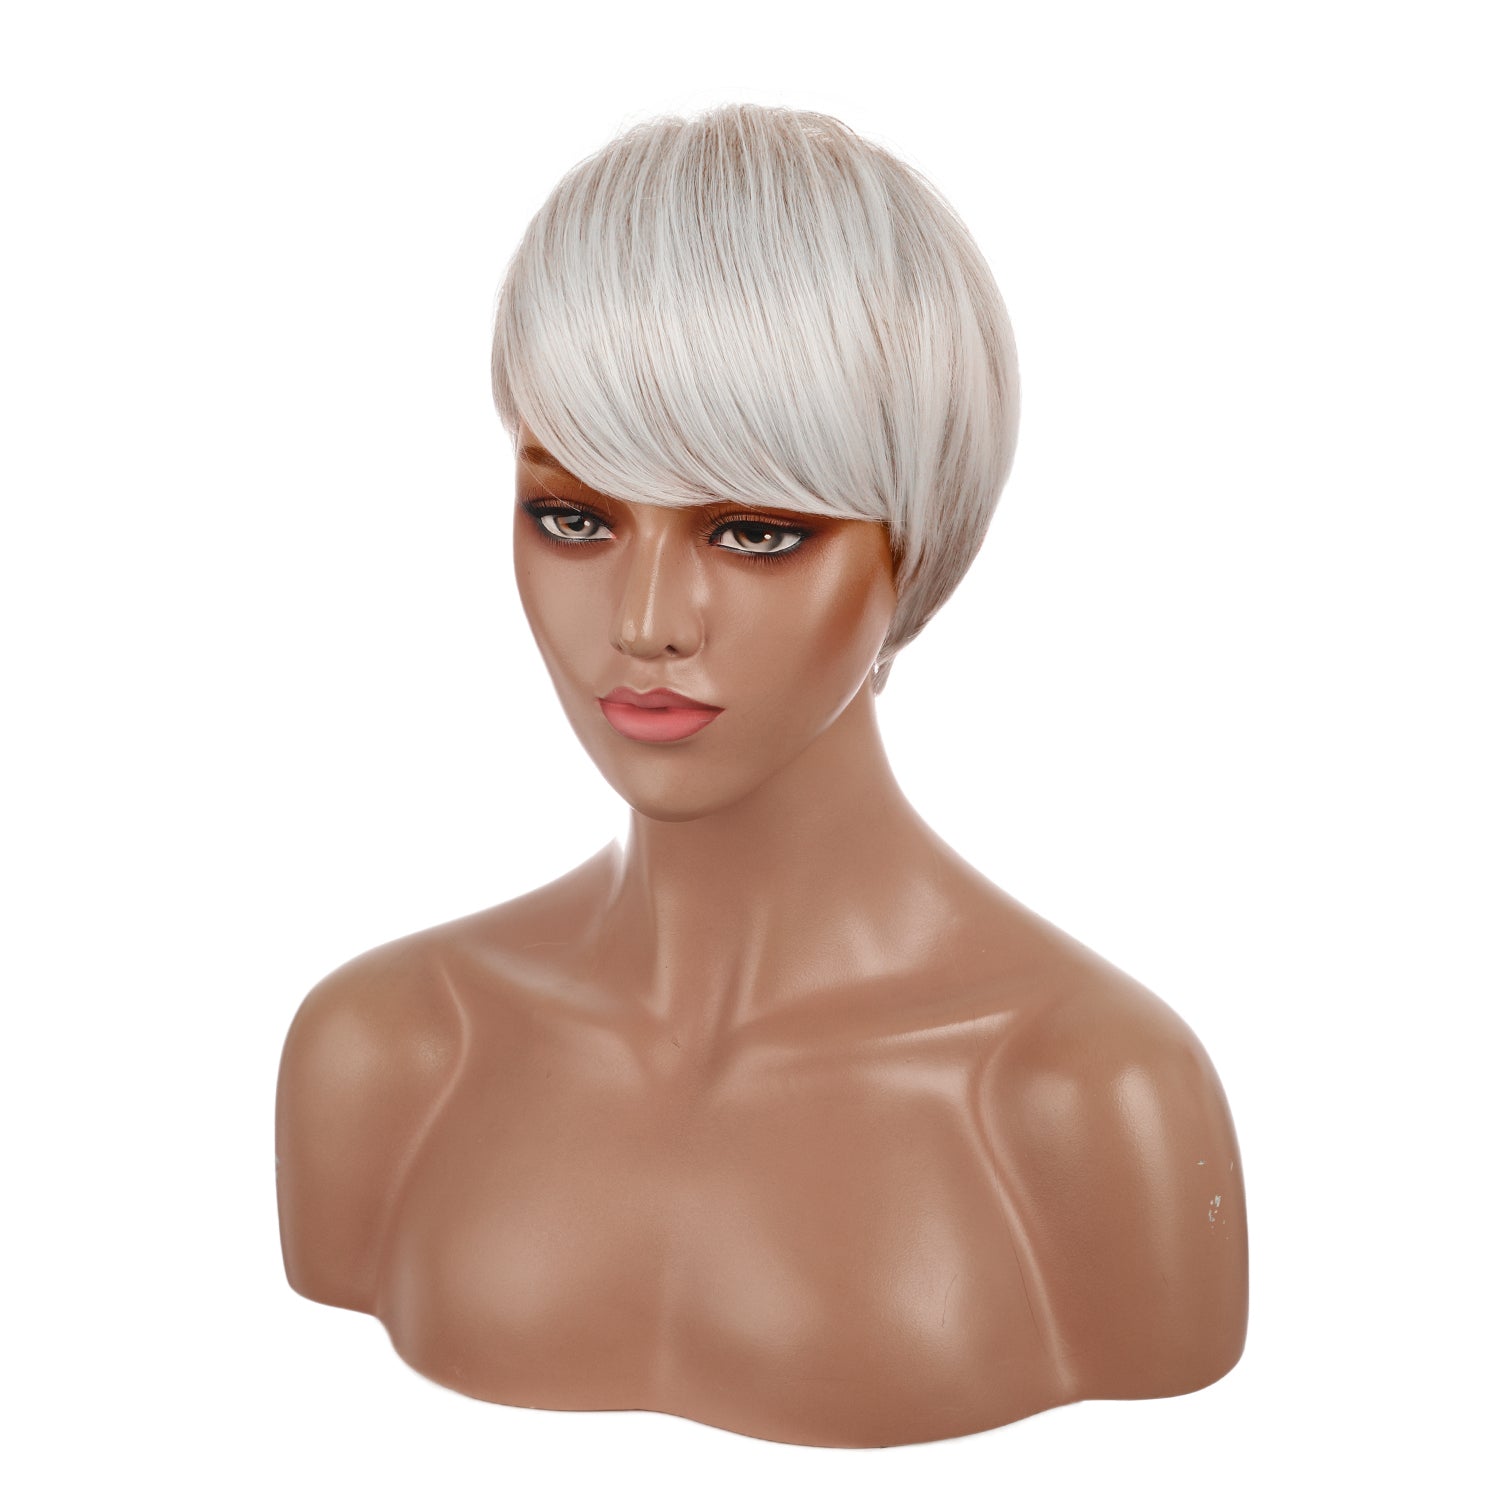 Trianna | Silver Short Pixie Cut Wavy Synthetic Hair Wig with Bangs